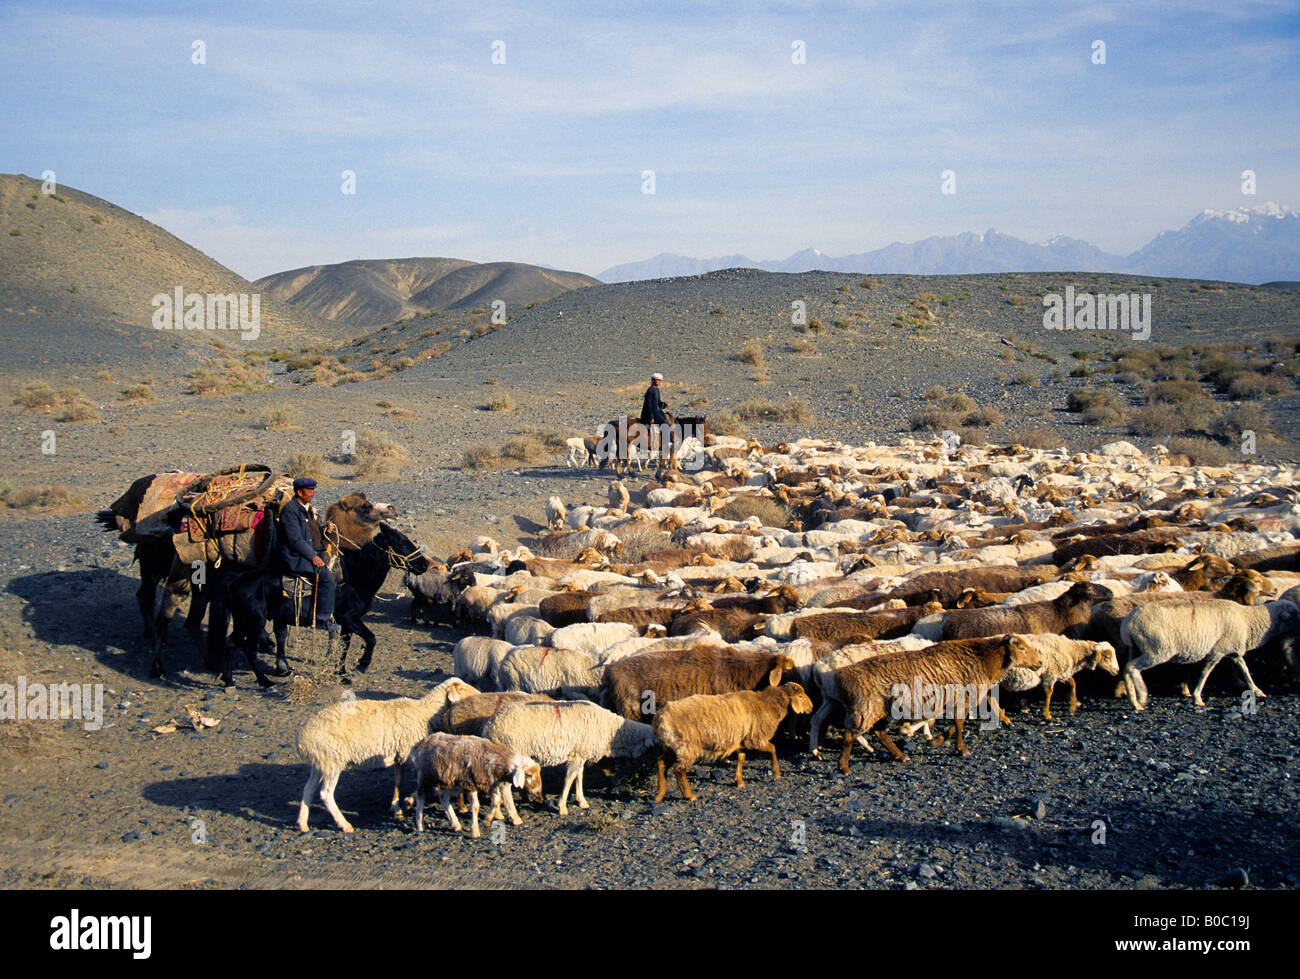 Uighur herdsmen on horseback with flock of sheep and goats on Silk Road along Tian Shan Mountians Stock Photo